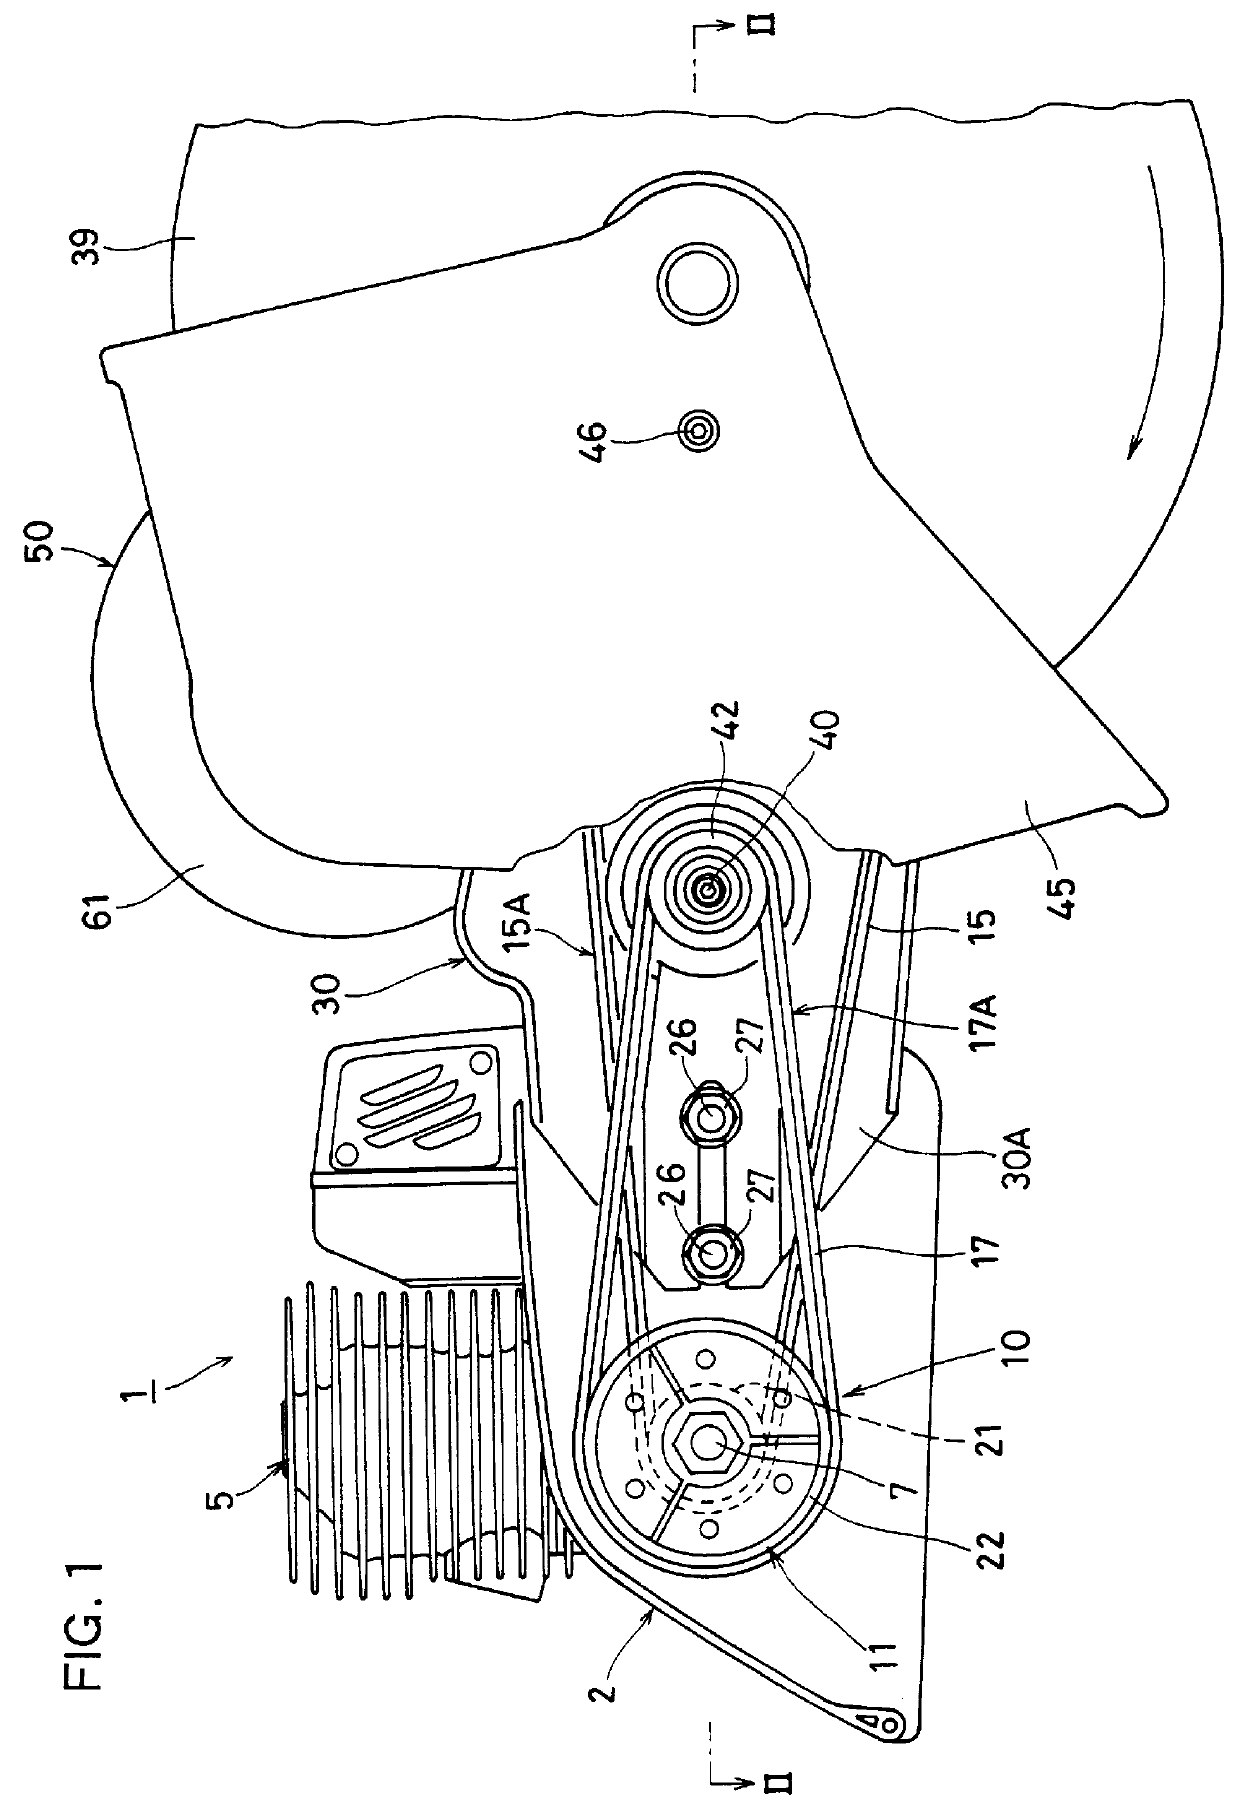 Power cutter and centrifugal clutch for a power cutter